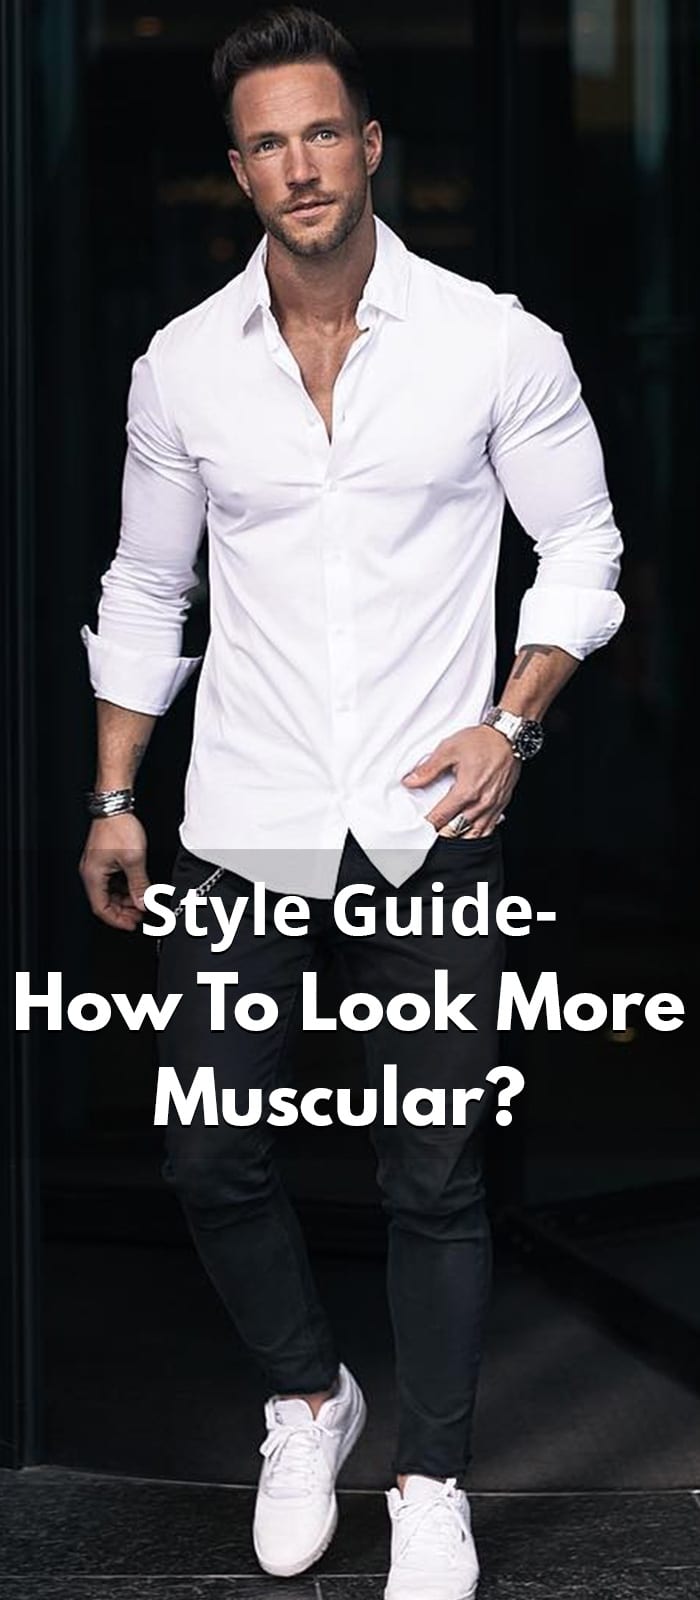 Style Guide- How To Look More Muscular